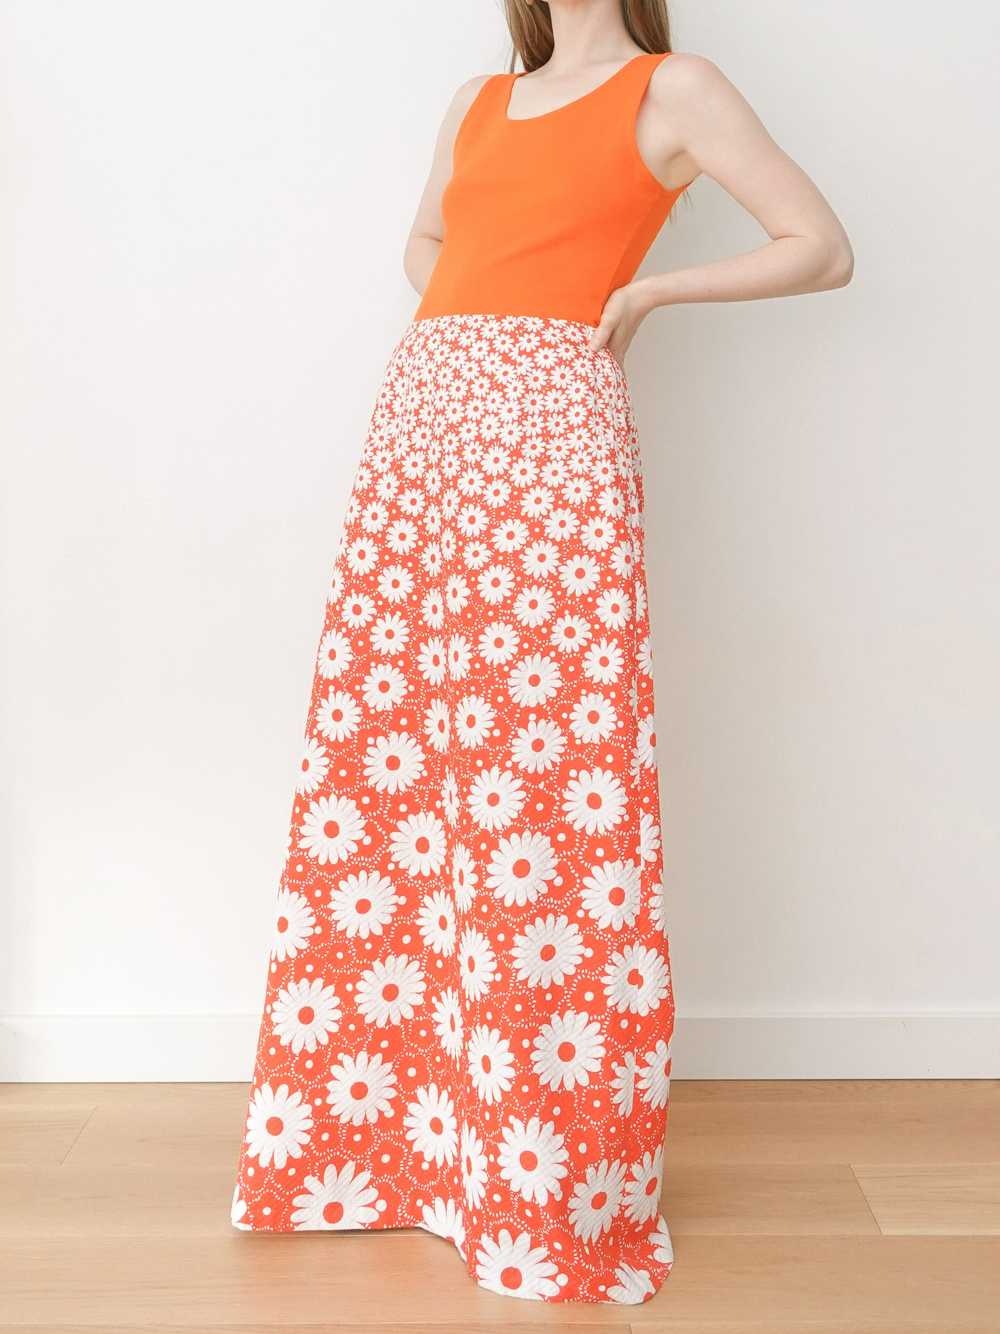 70s Red and White Daisy Print Maxi Skirt - image 1